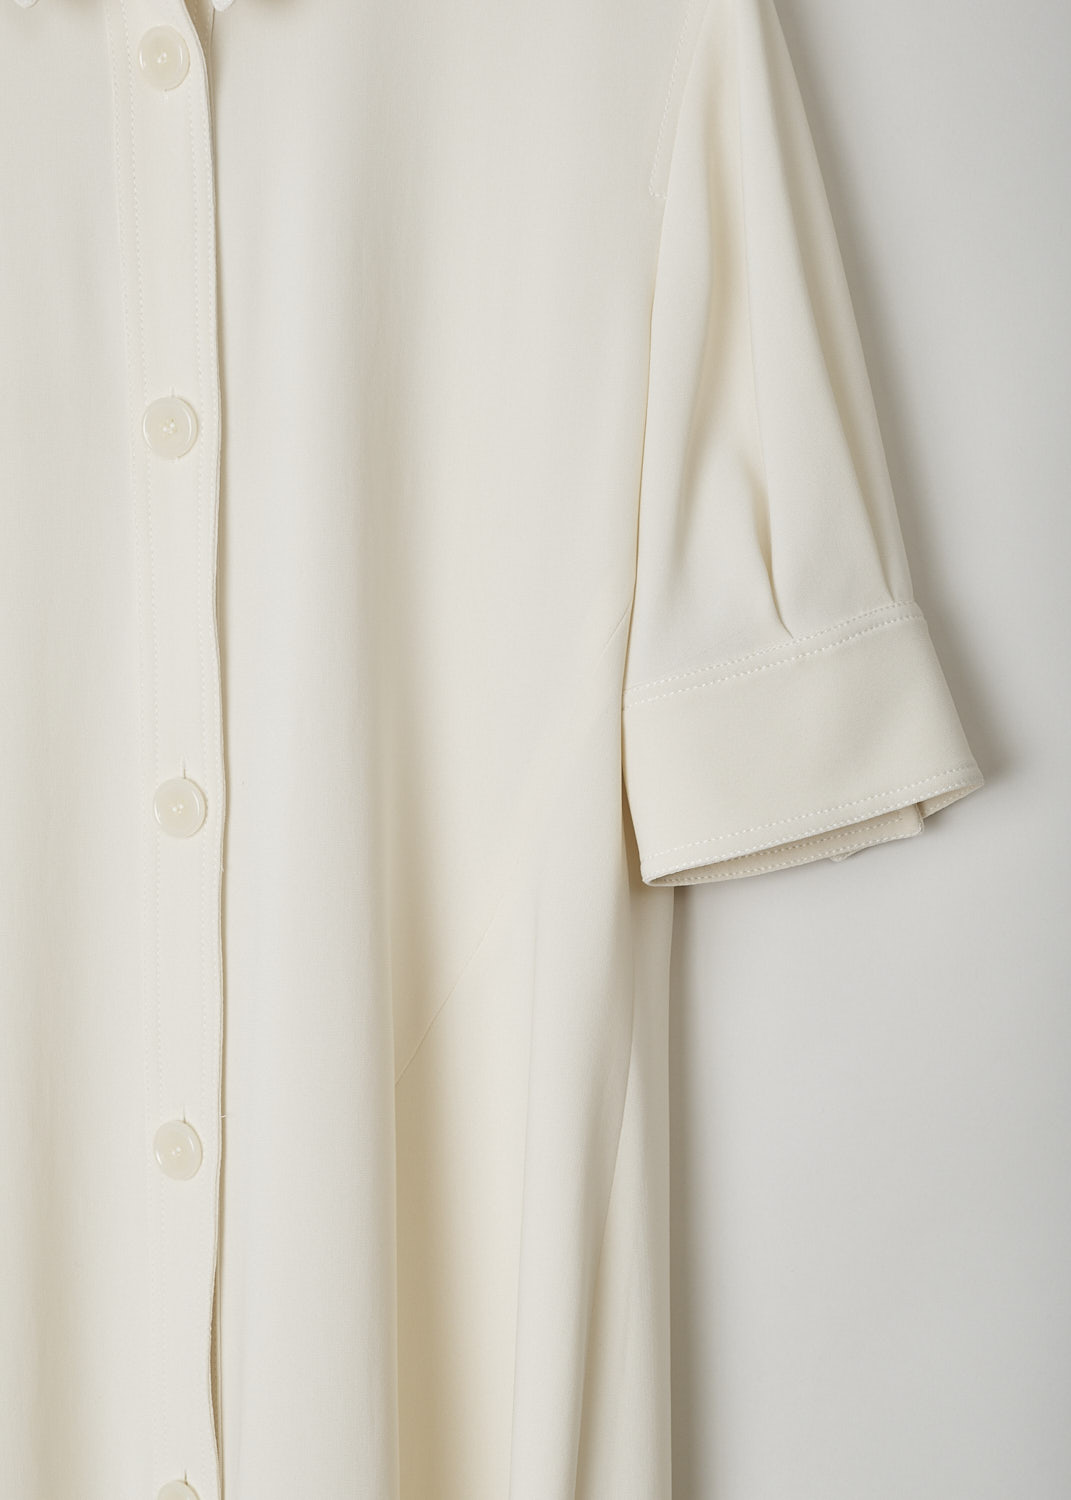 ASPESI, OFF-WHITE MIDI SHIRT DRESS, 2901_2088_10073, White, Beige, Detail, This off-white midi shirt dress has a classic collar and a front button closure. The dress has short pleated sleeves with buttoned cuffs. The dress has a straight hemline. In the back, the dress has a centre seam. 
